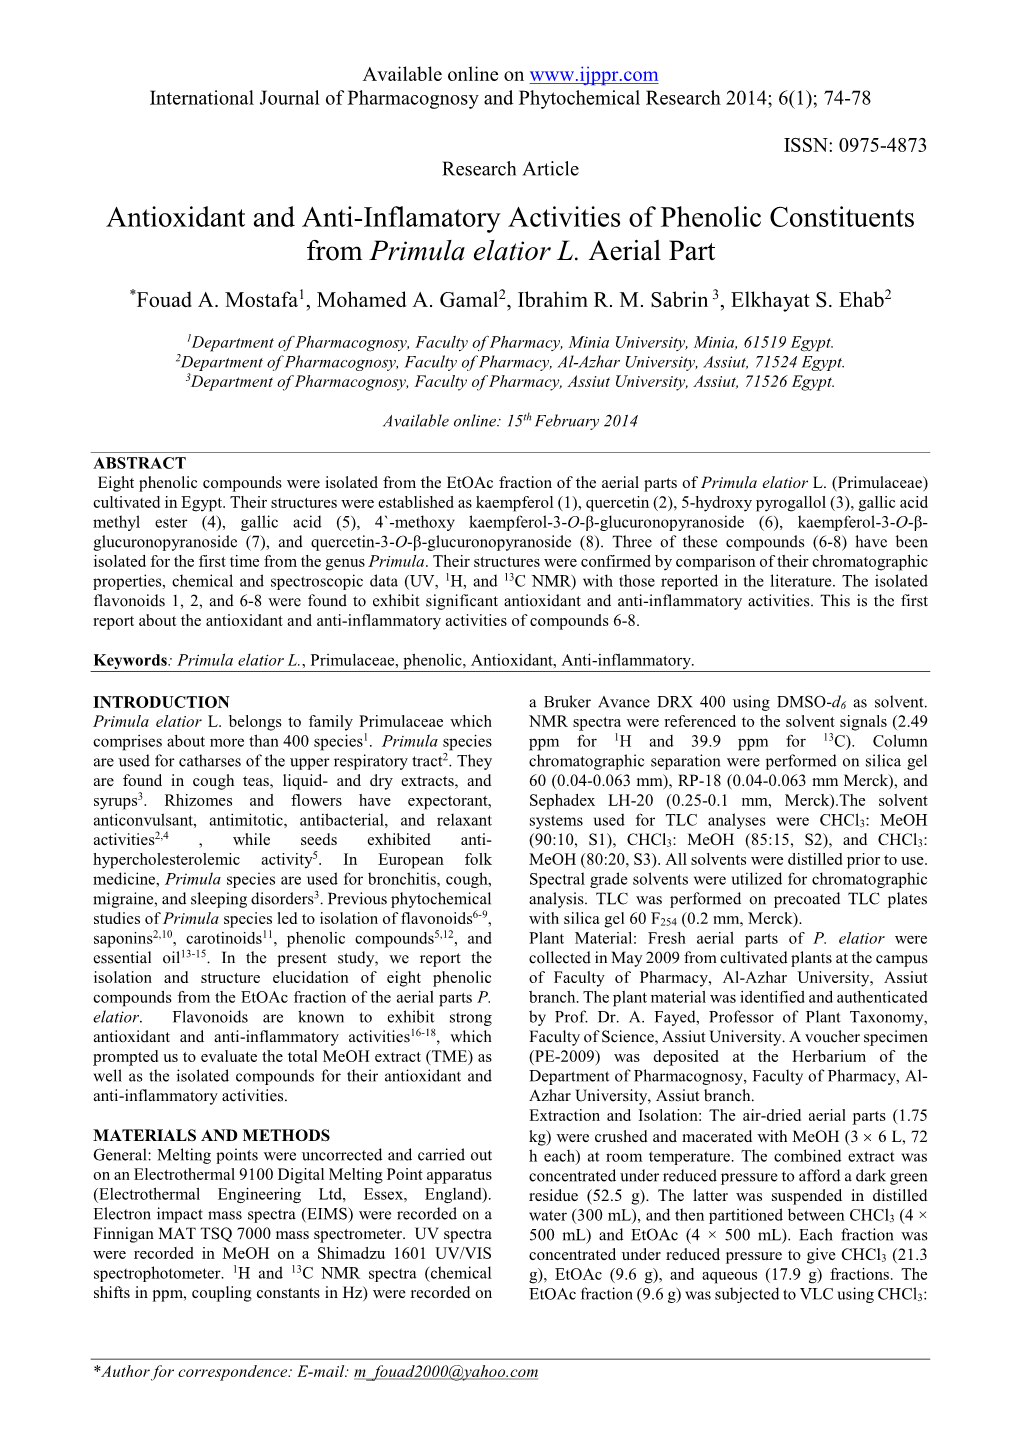 Antioxidant and Anti-Inflamatory Activities of Phenolic Constituents from Primula Elatior L. Aerial Part